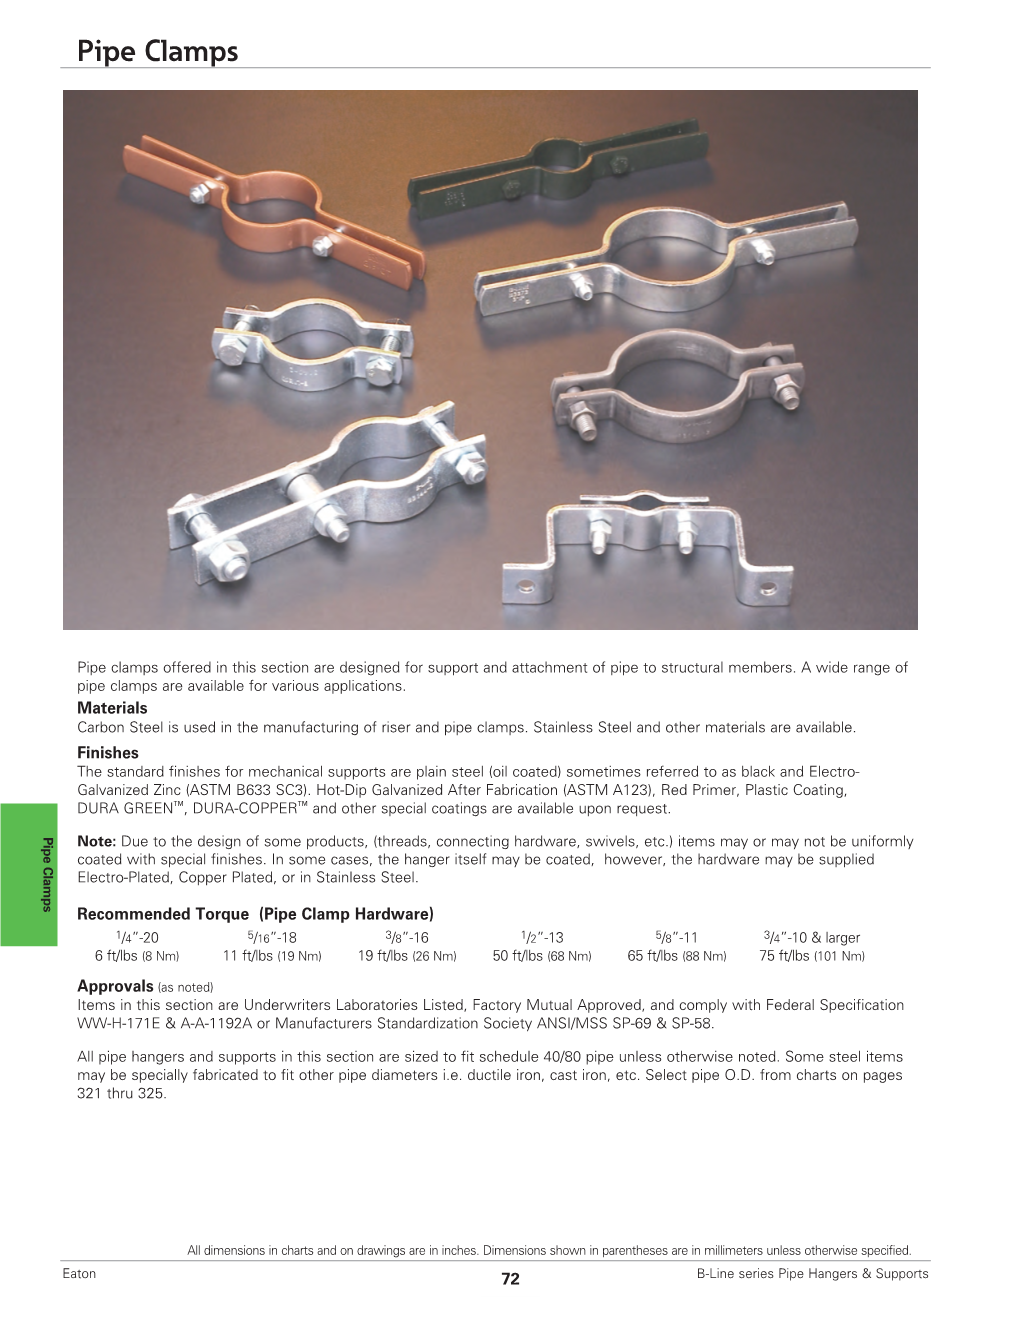 Pipe Clamps Section of Pipe Hanger Catalog